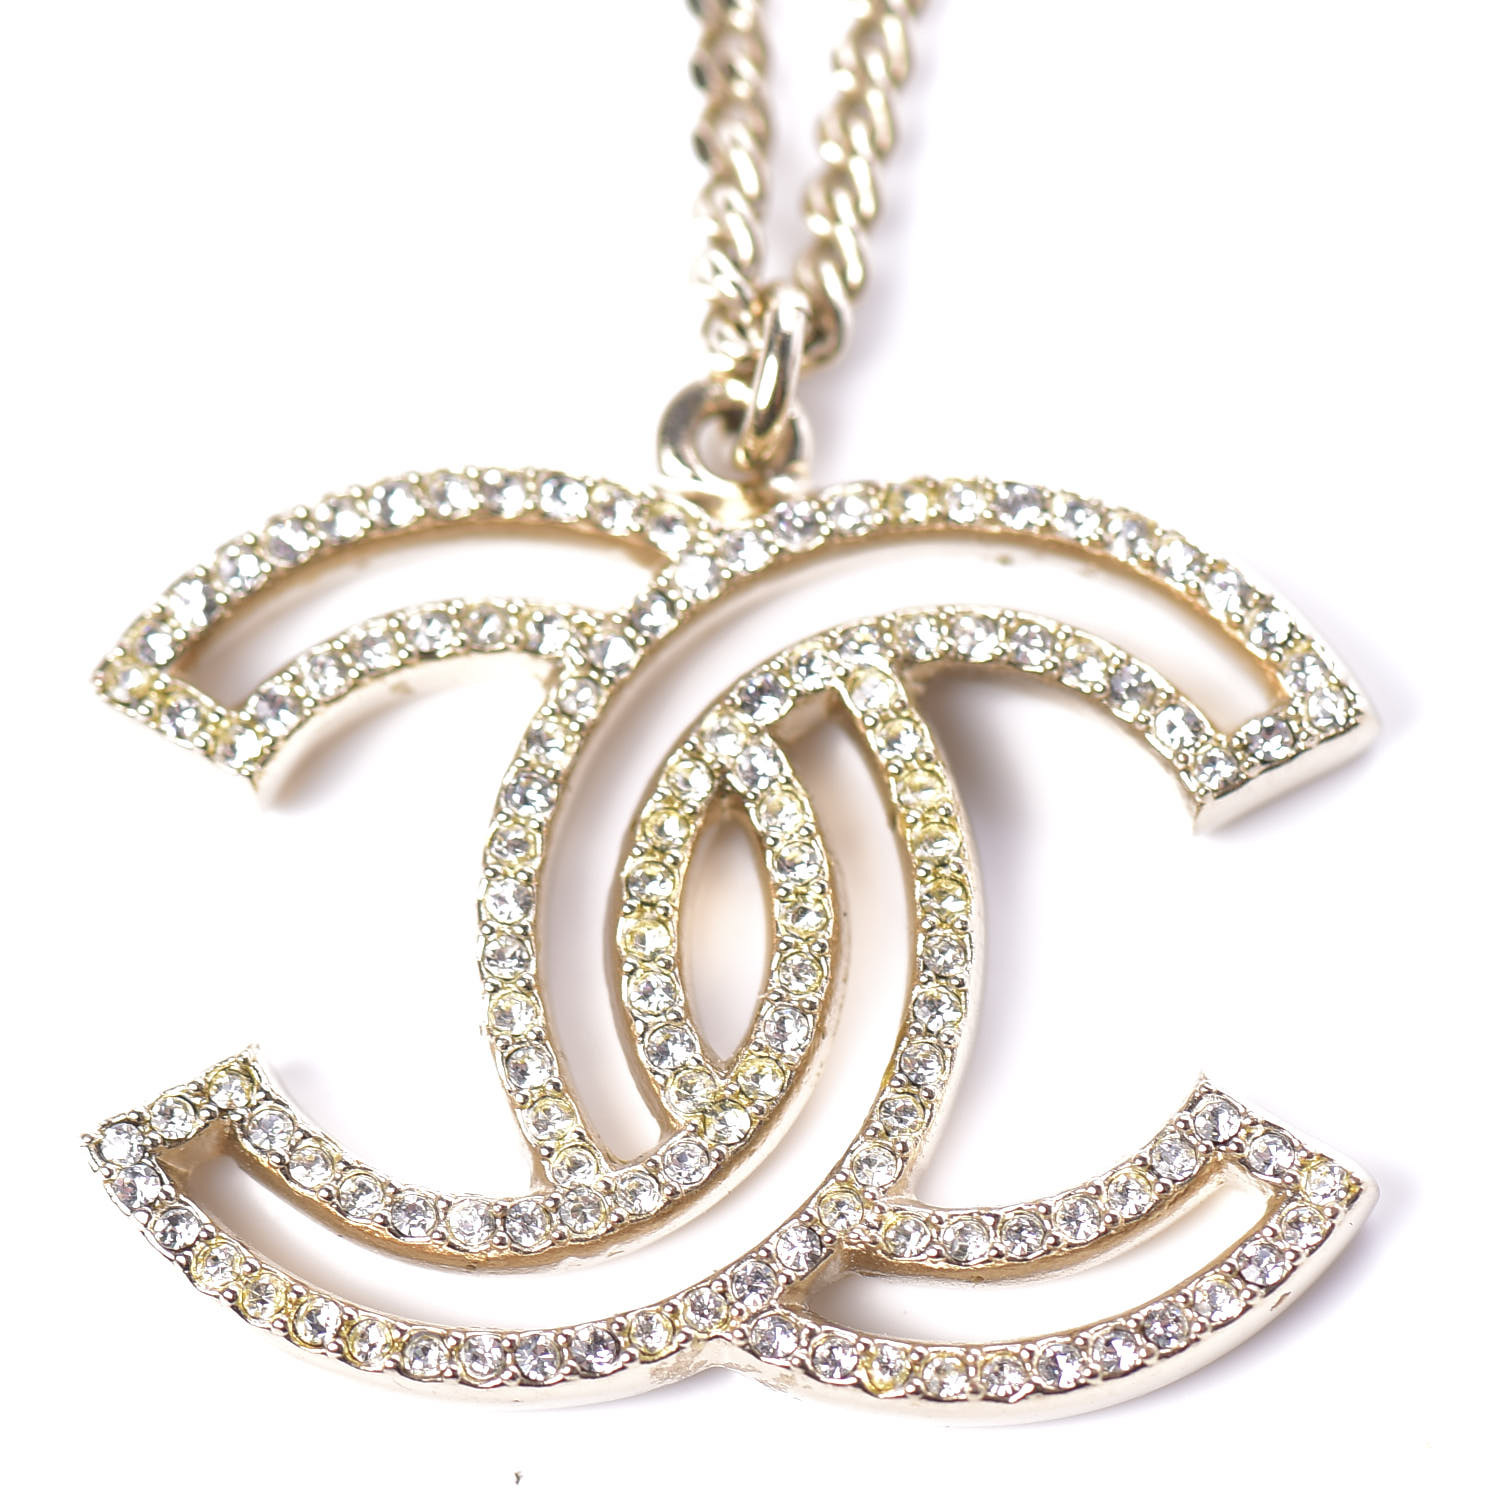 CHANEL Crystal CC 100 Anniversary Necklace Gold 655443 | FASHIONPHILE